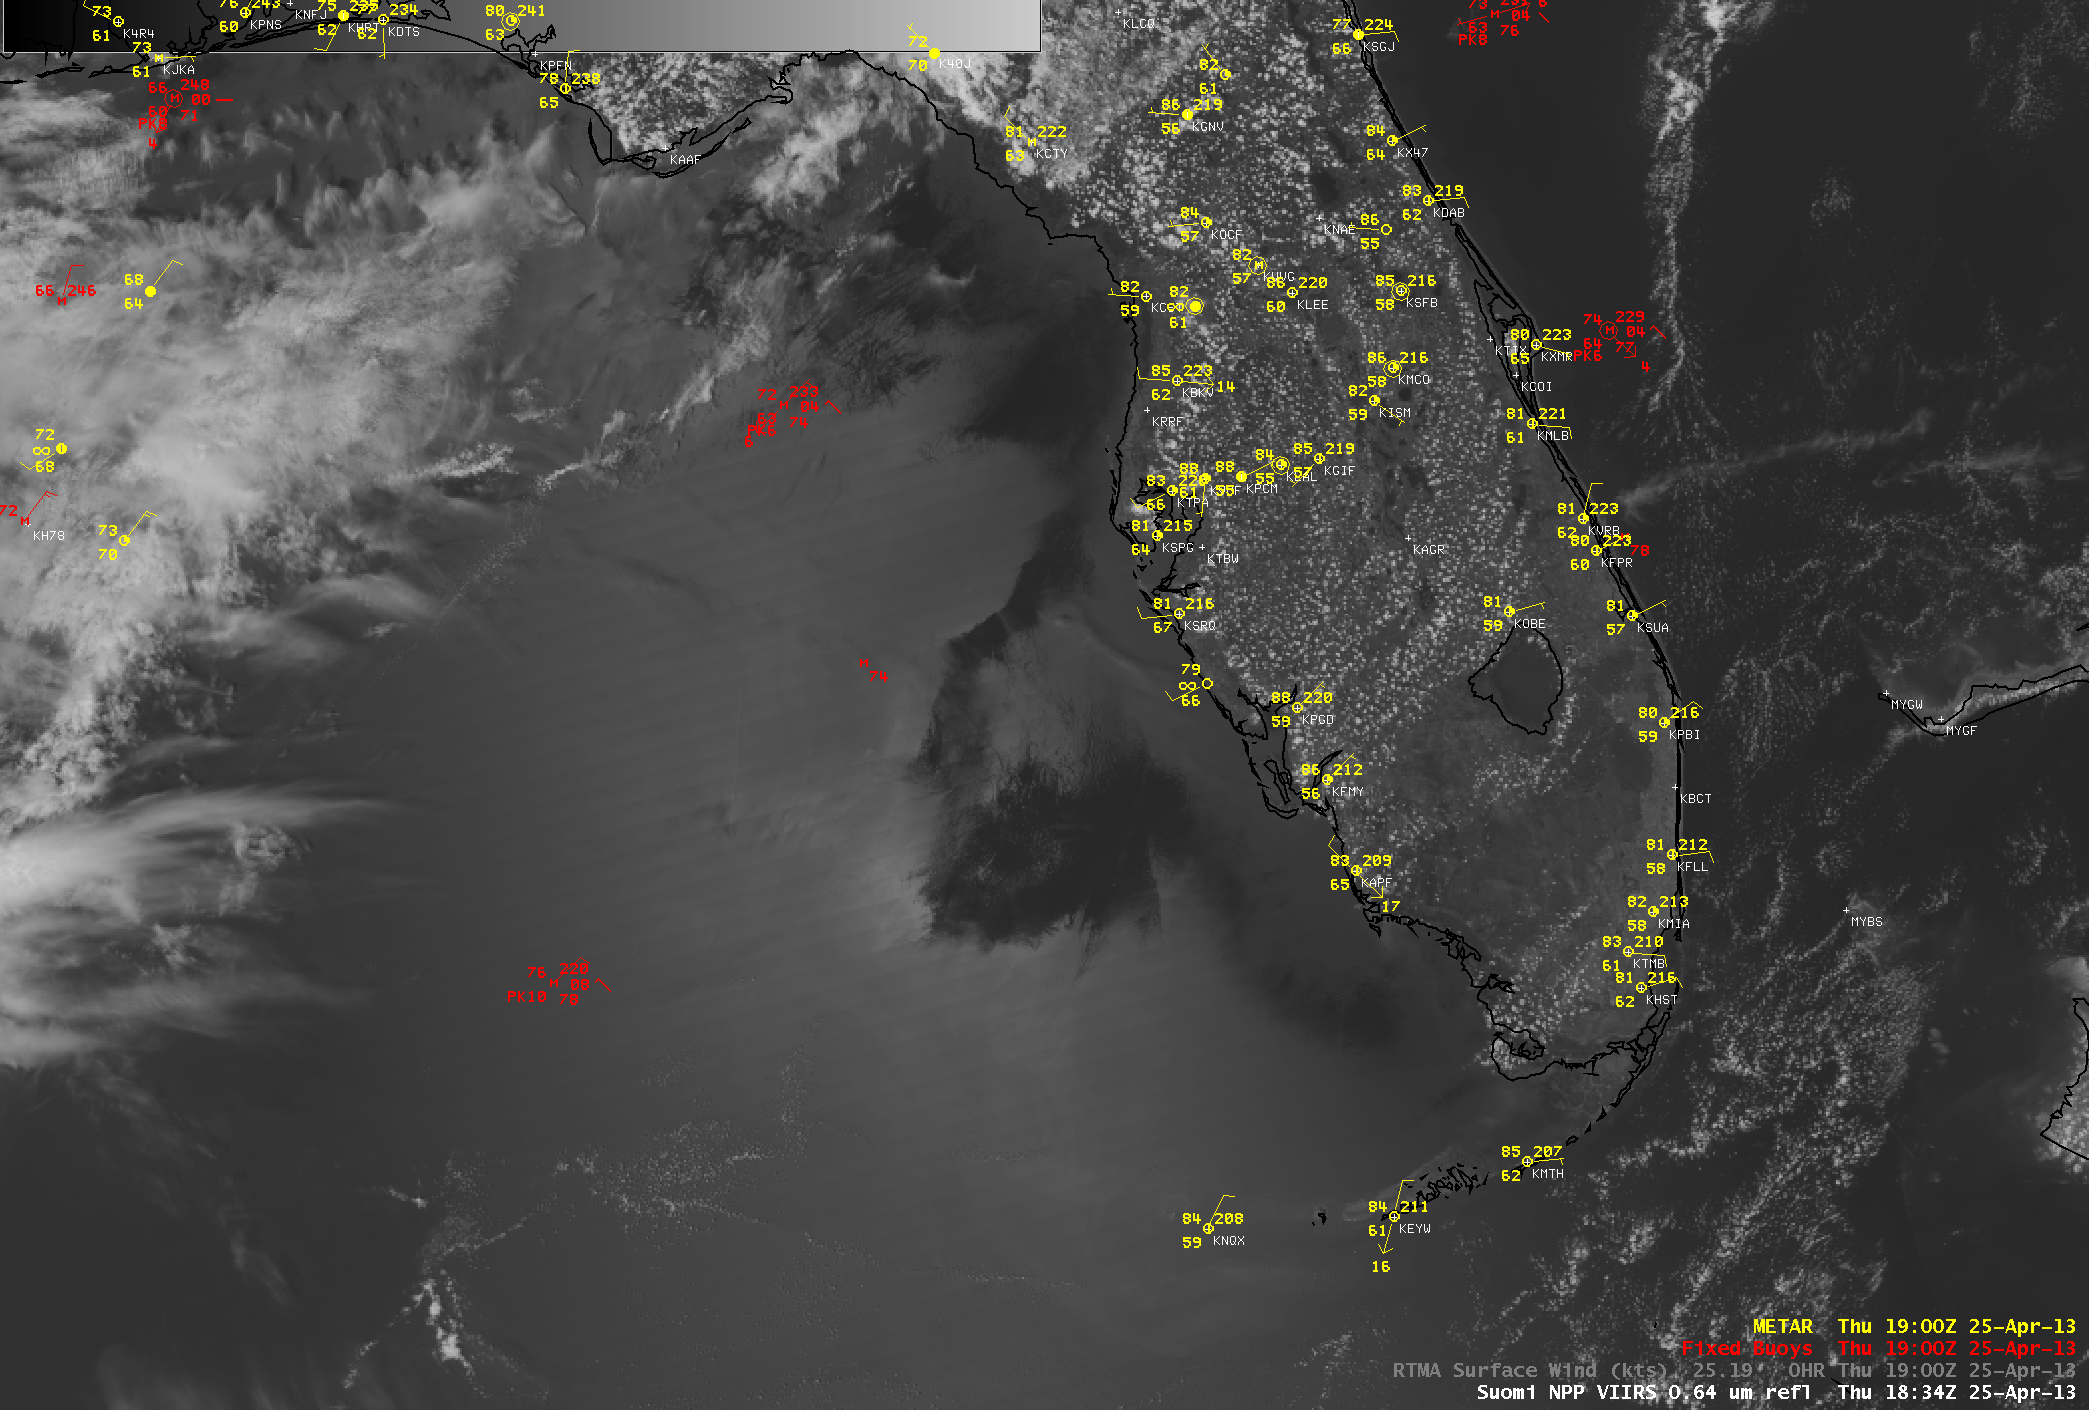 Suomi NPP VIIRS 0.65 Âµm visible channel image with overlays of surface reports and RTMA surface winds